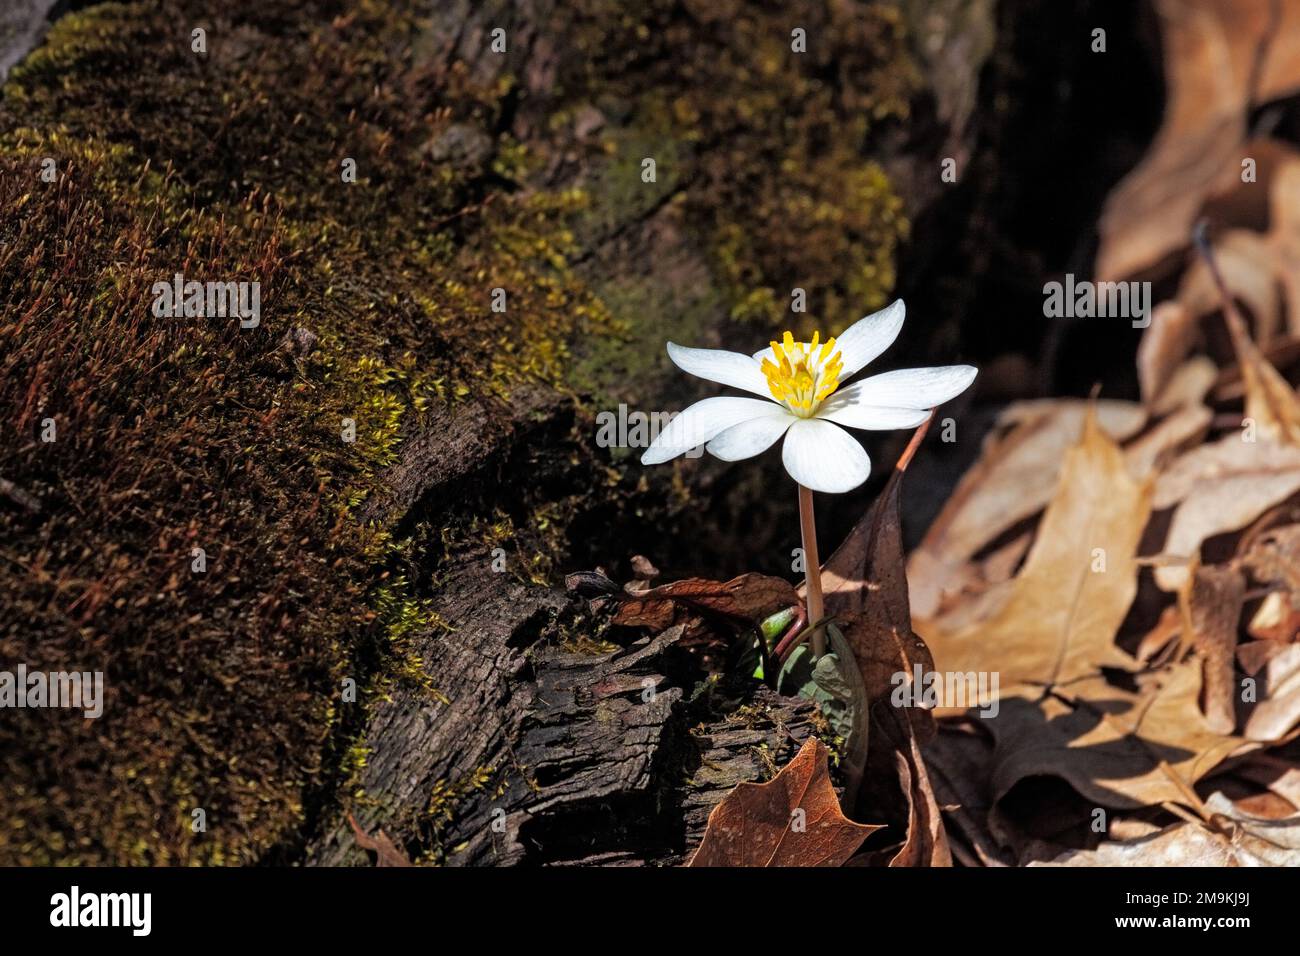 A bloodroot's white petals and golden stamen glow as it rises above the leaf litter on a forest floor. Stock Photo